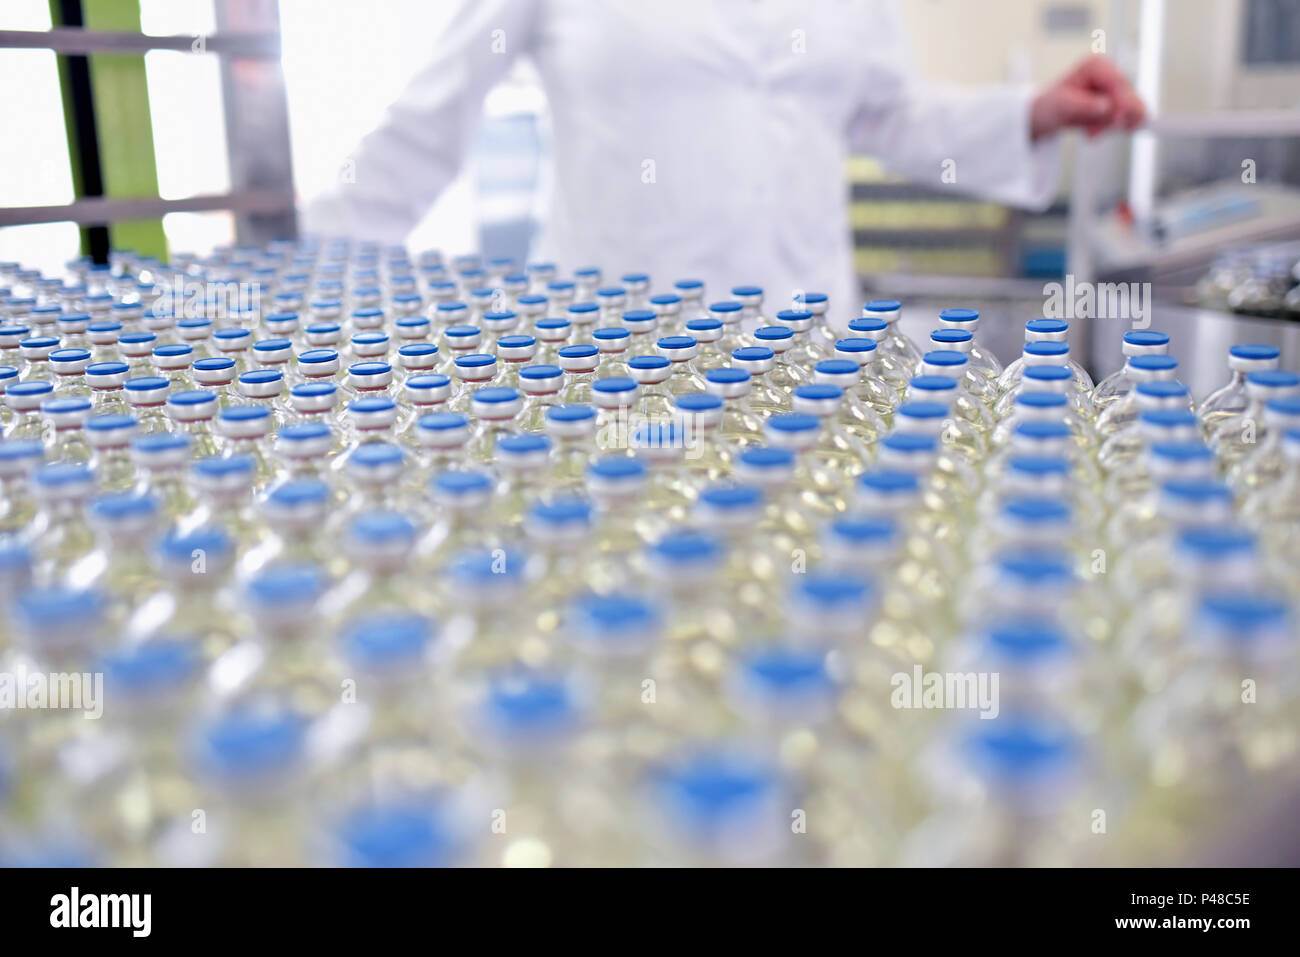 production and filling of drugs in a pharmaceutical conveyor belt with bottles and a worker Stock Photo